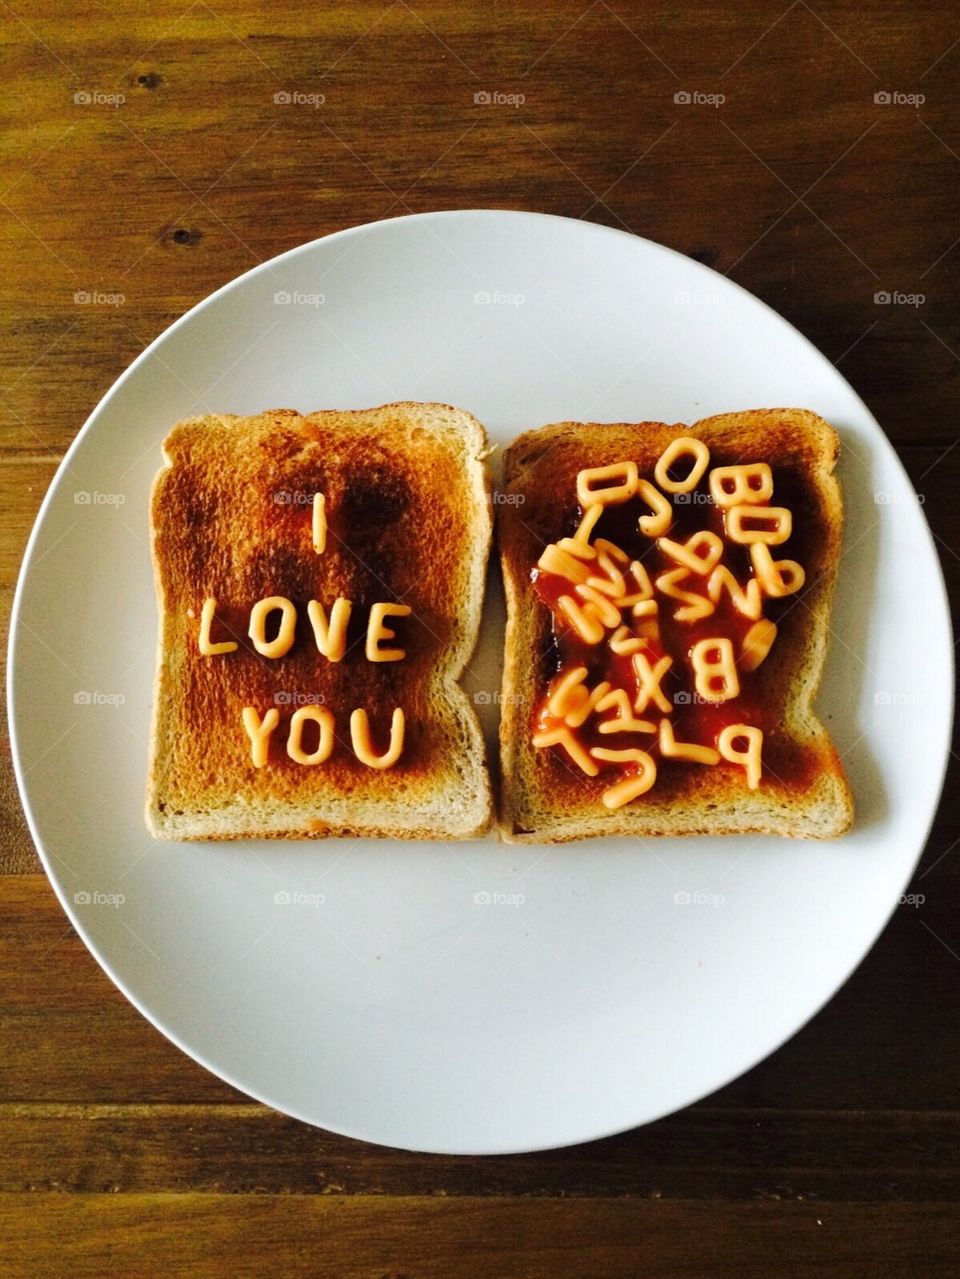 Love you on toast